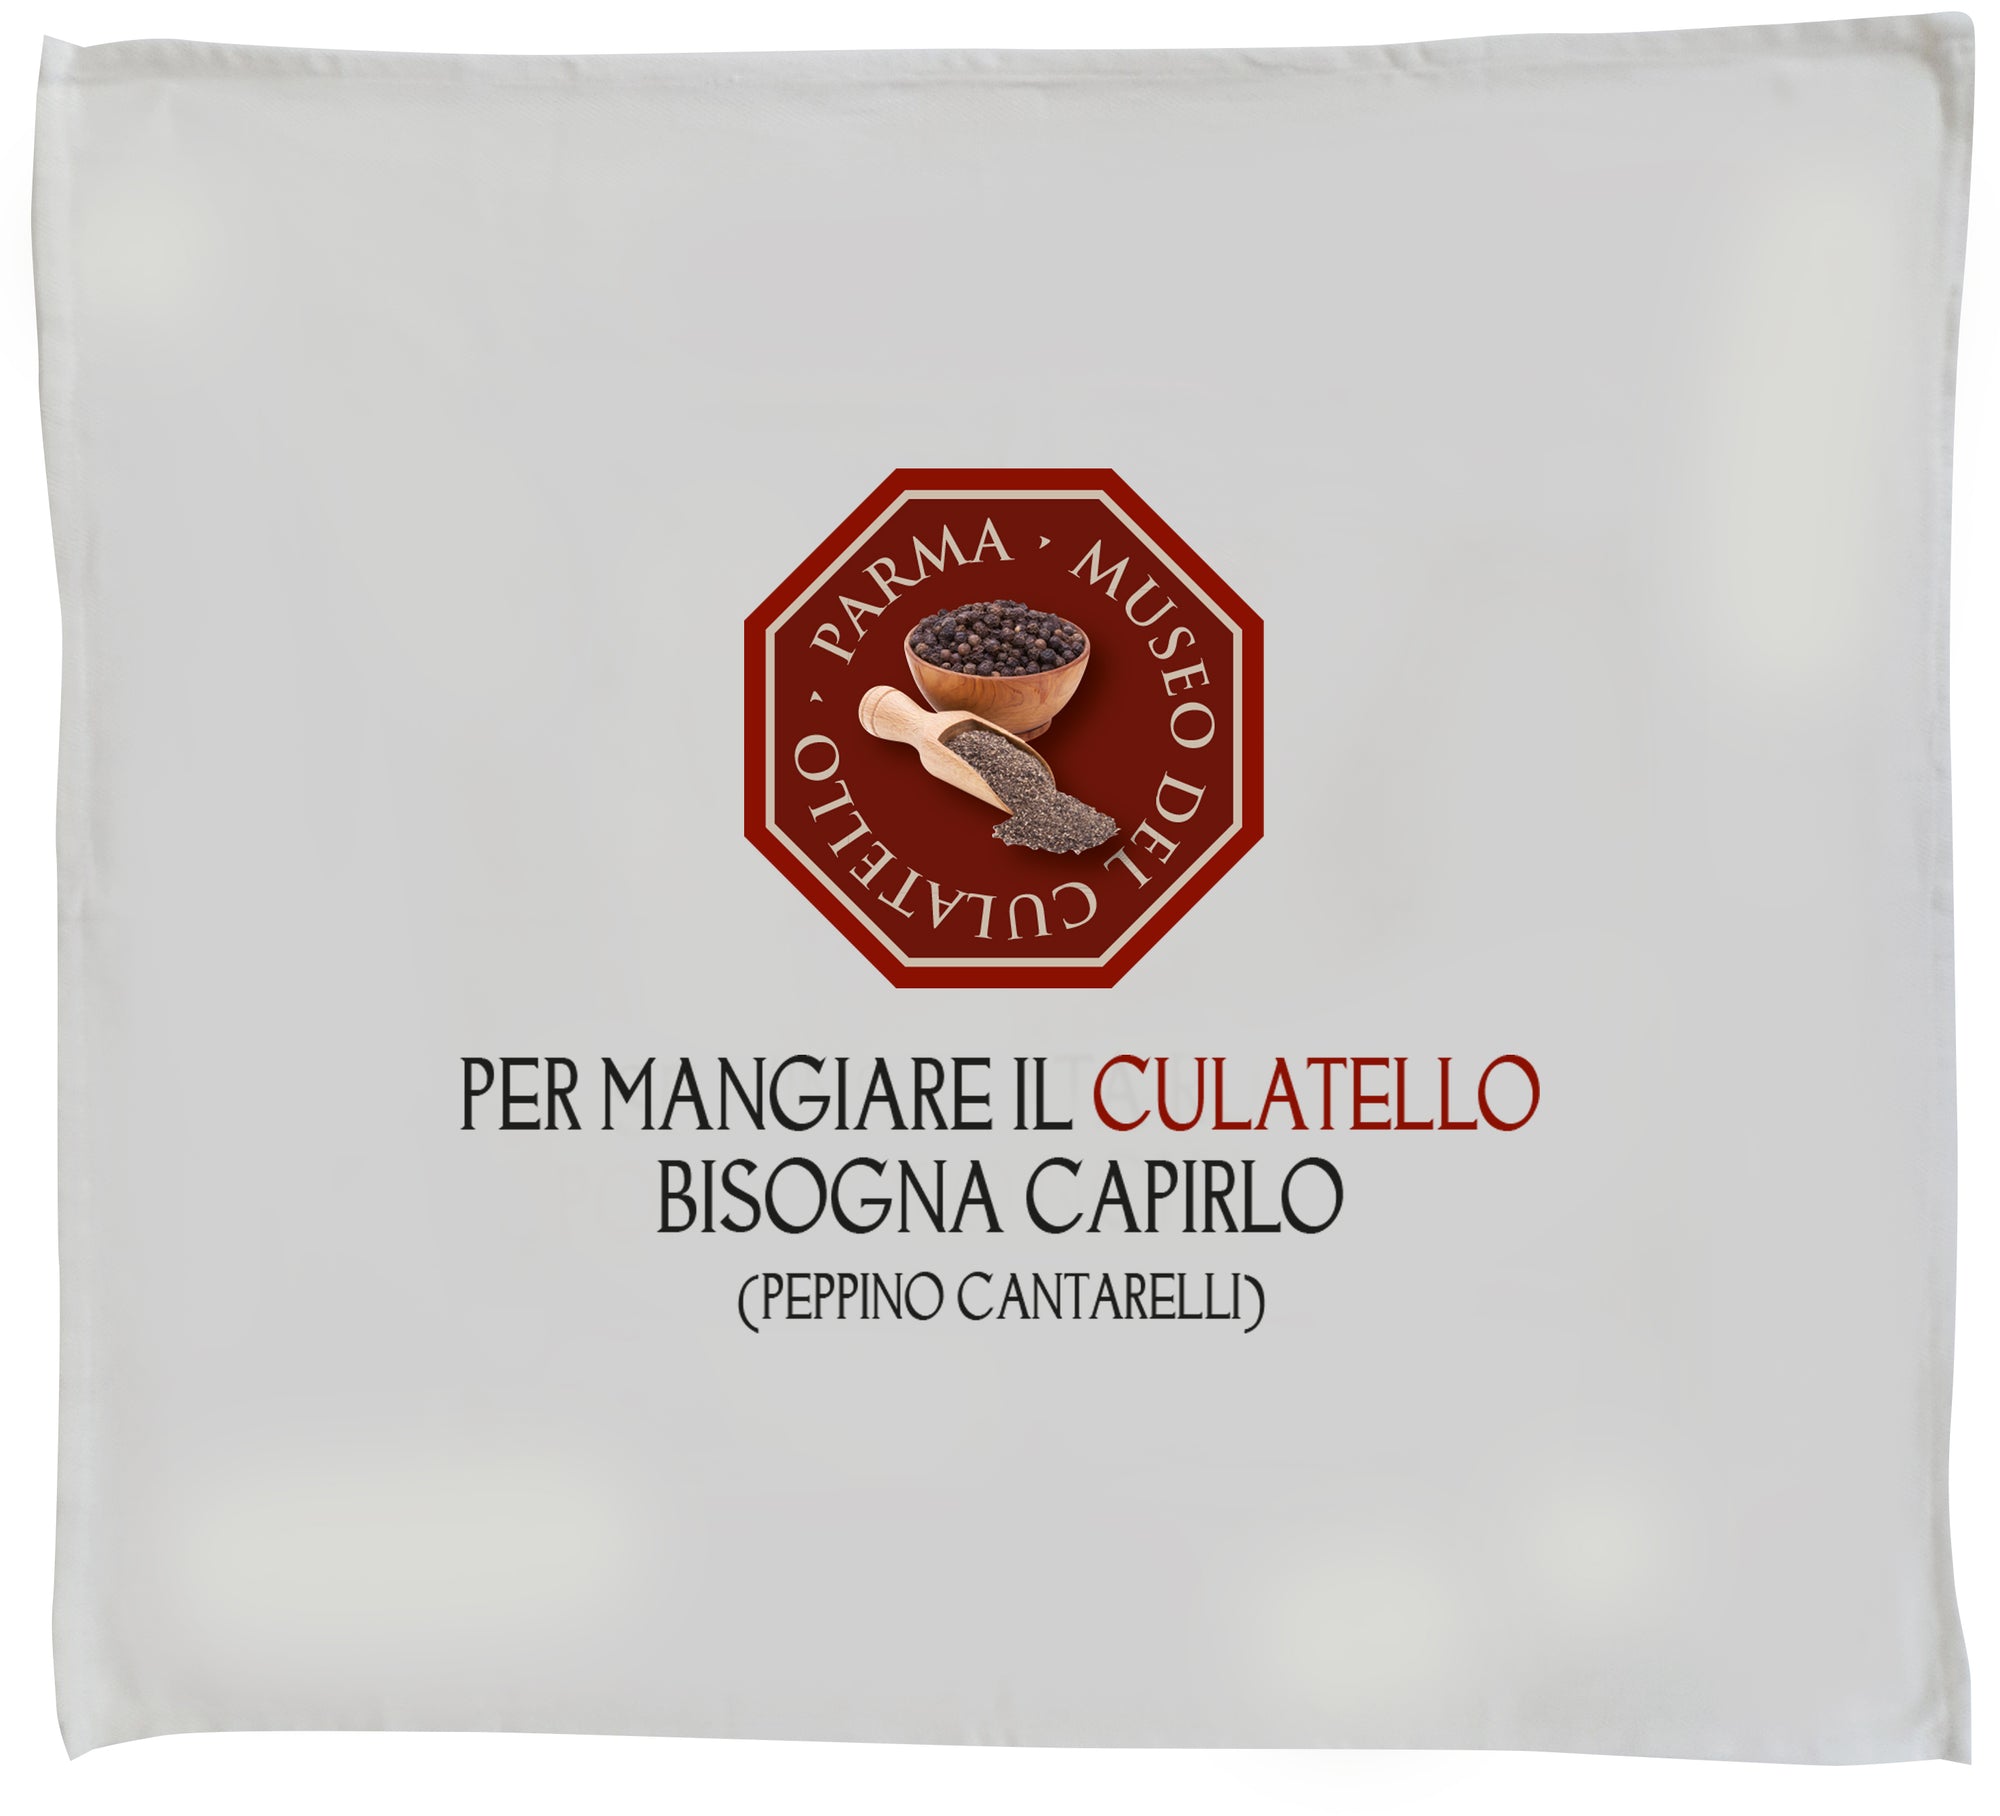 Cotton cloth Food Museums - "To eat culatello ..."